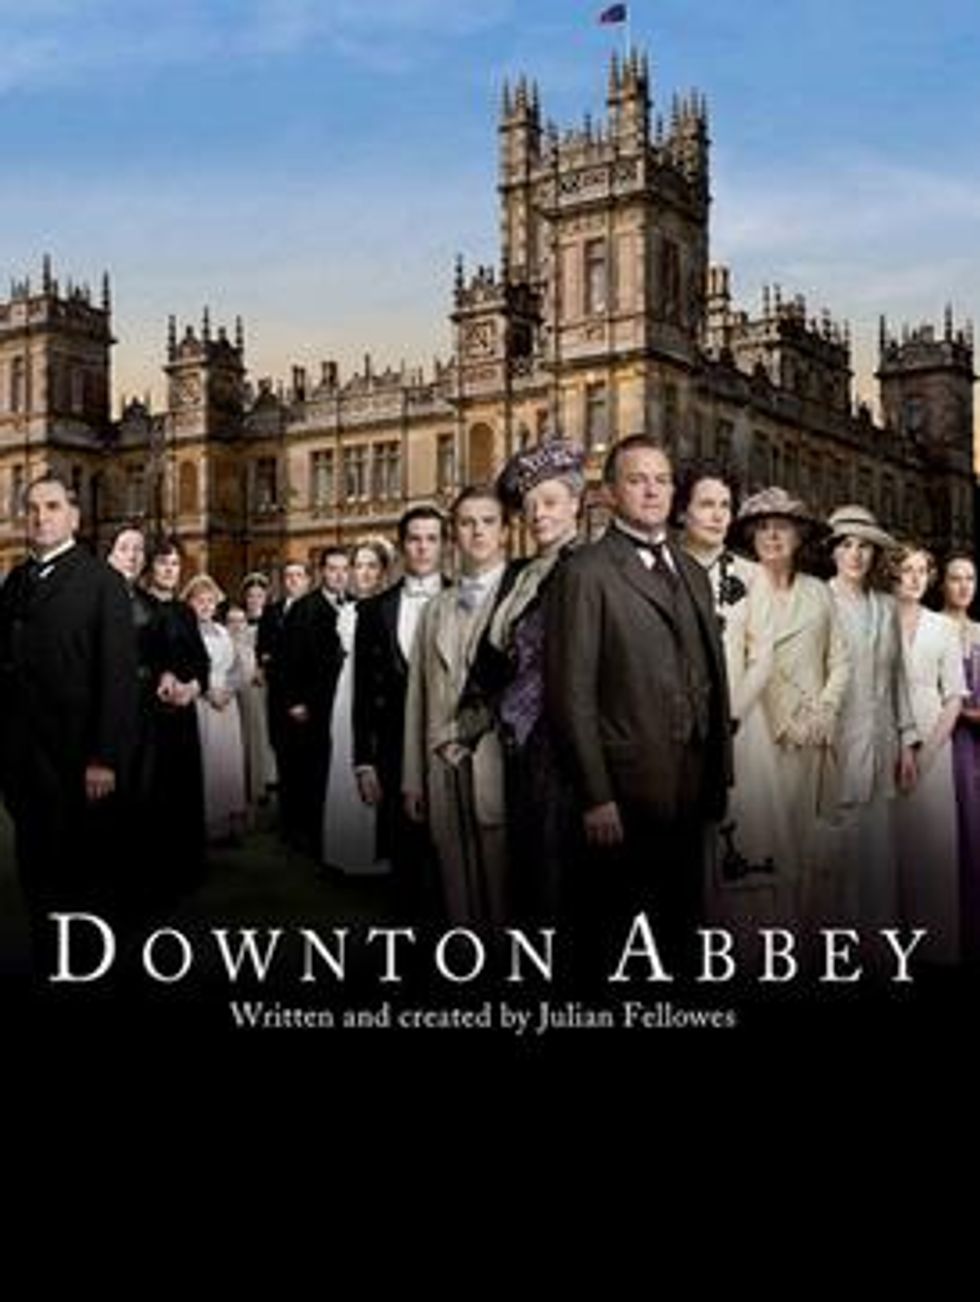 What 'Downton Abbey's' Popularity Means For America